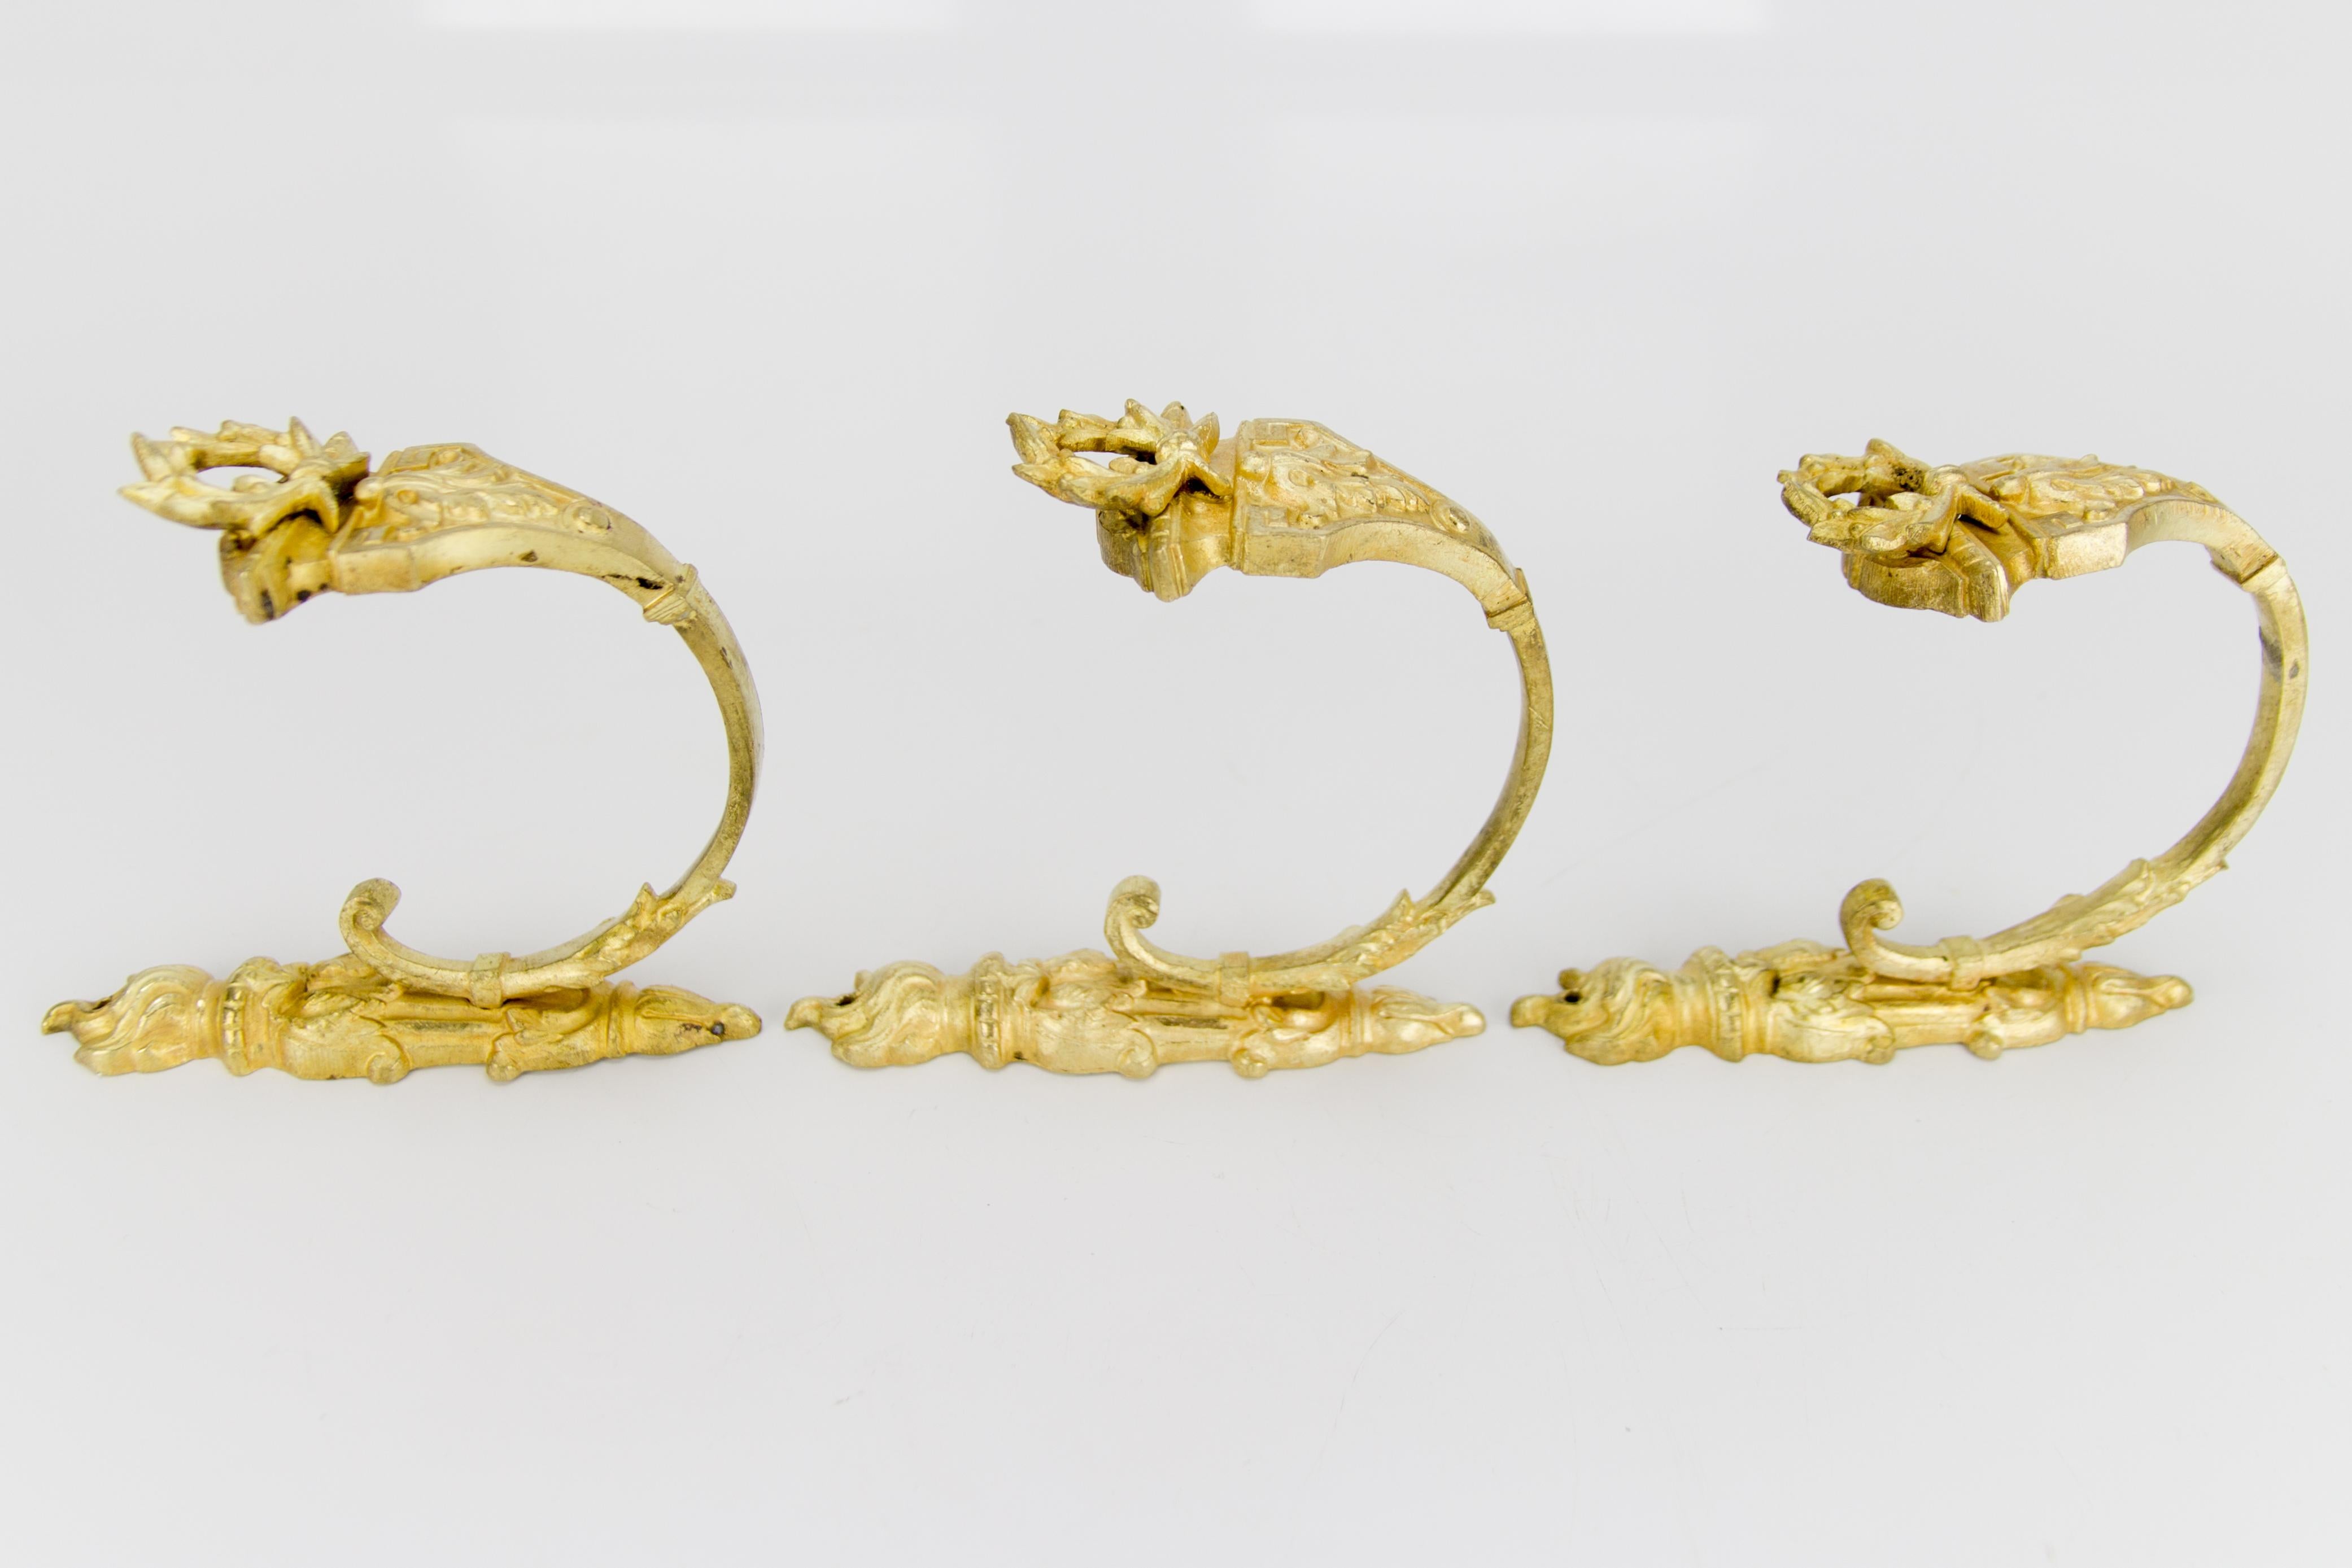 French Gilt Bronze Curtain Tiebacks or Curtain Holders Signed A.D., Set of 3 For Sale 4